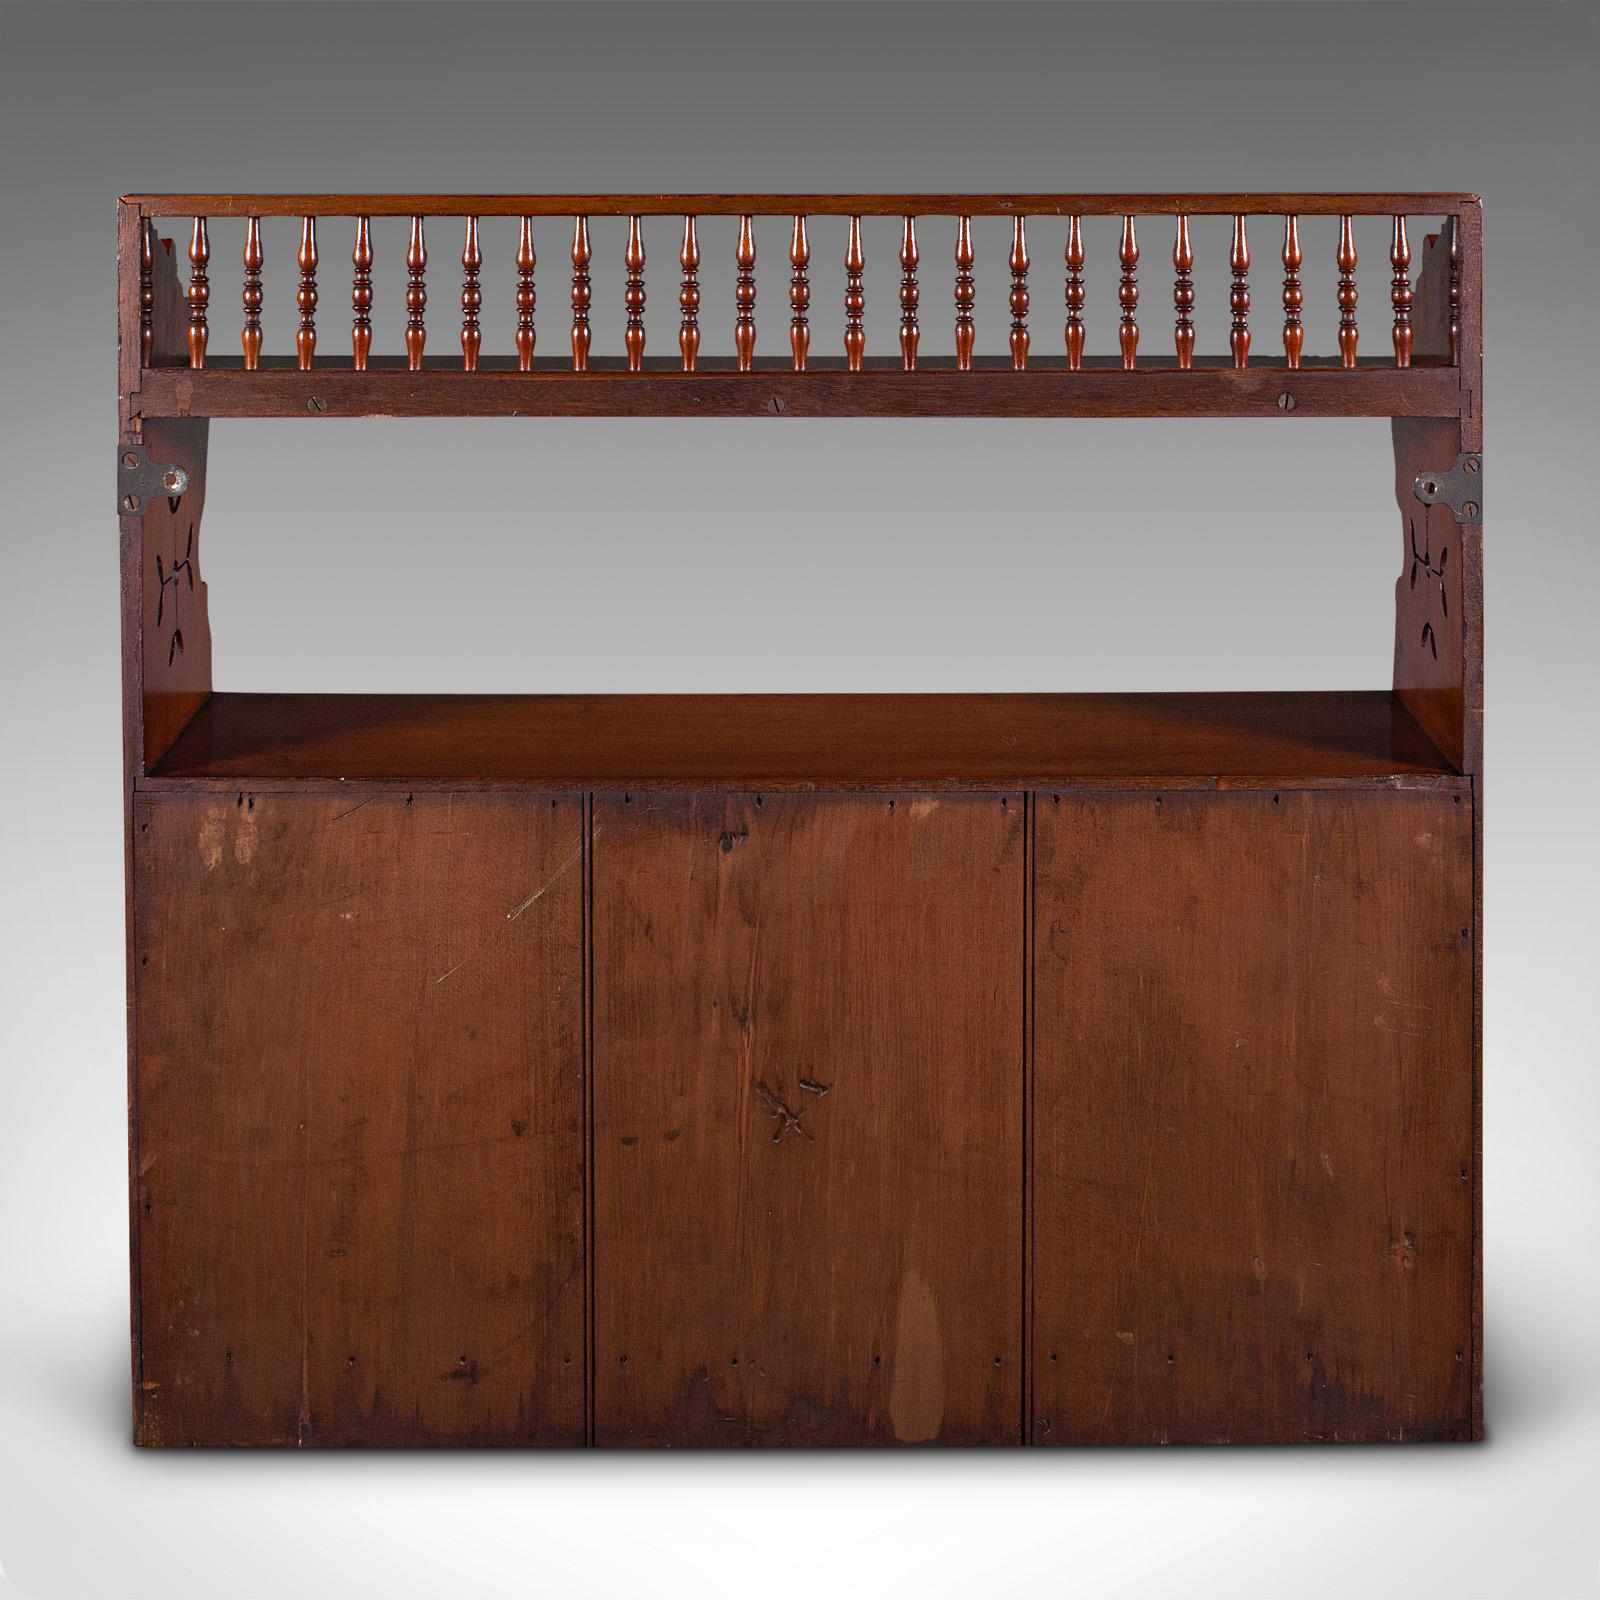 19th Century Antique Mounted Whatnot Cabinet, English, Walnut, Display Cupboard, Victorian For Sale